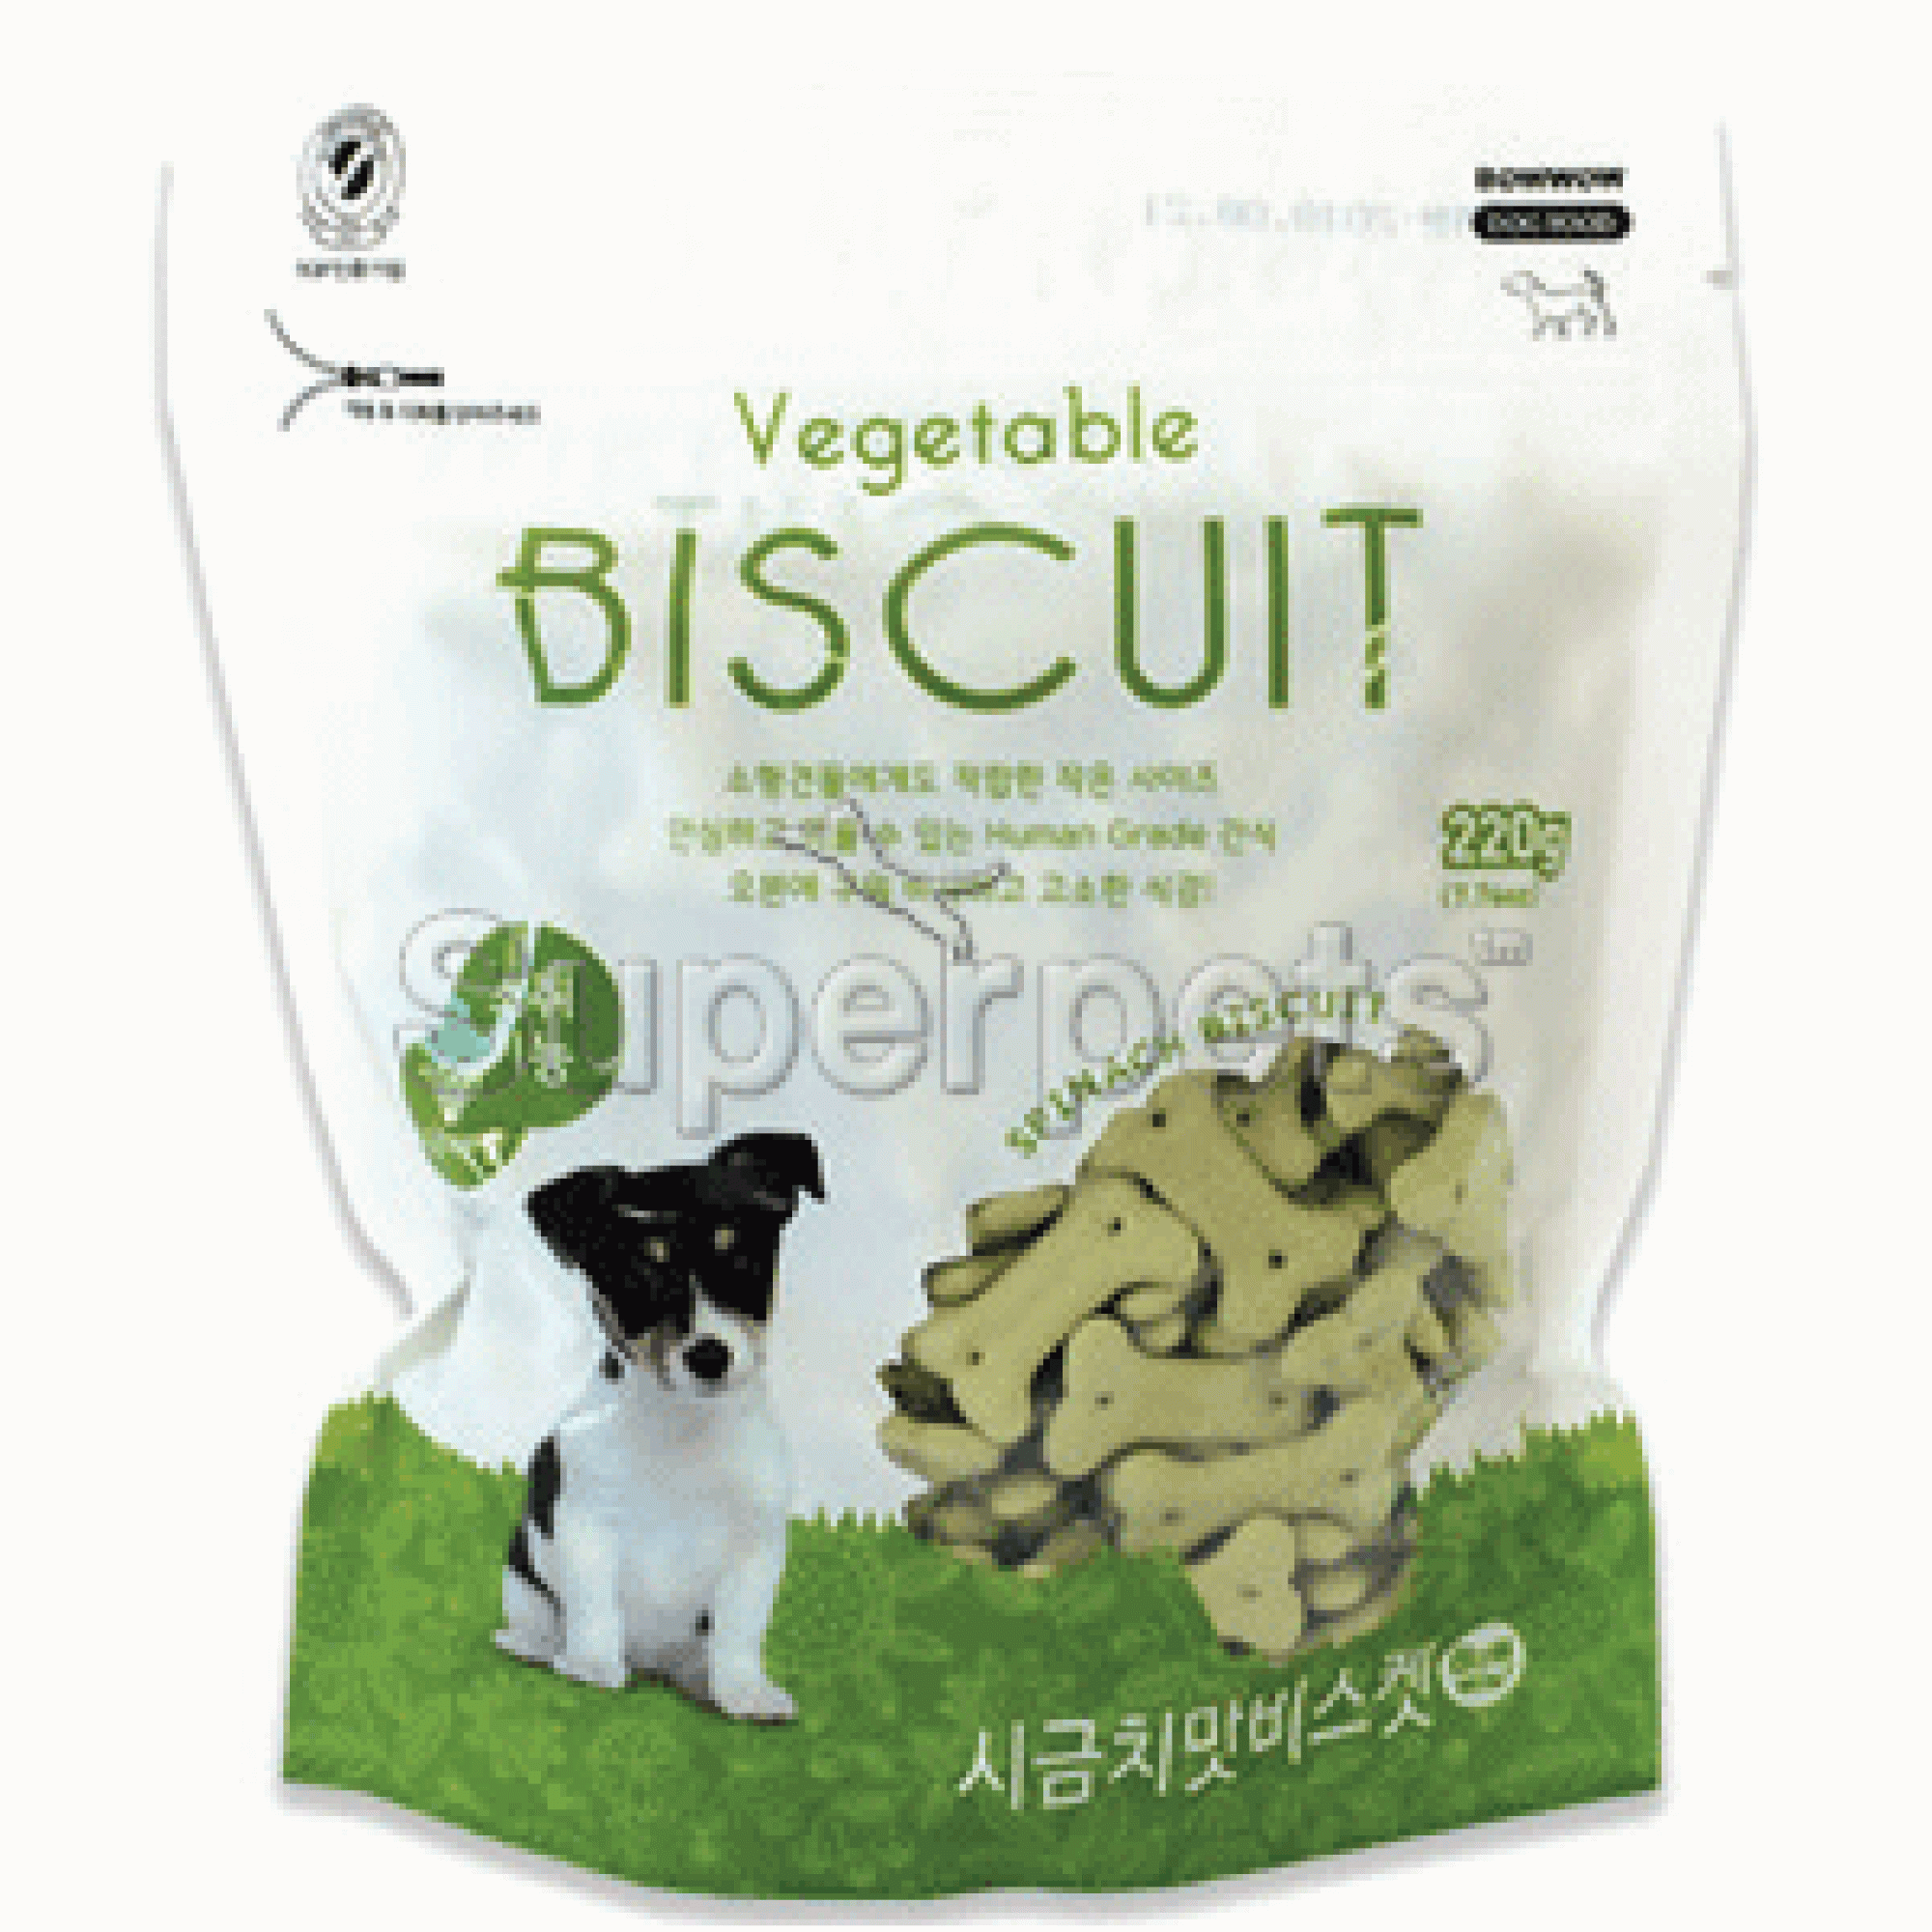 Bow Wow - 2023 Vegetable Biscuit 220g